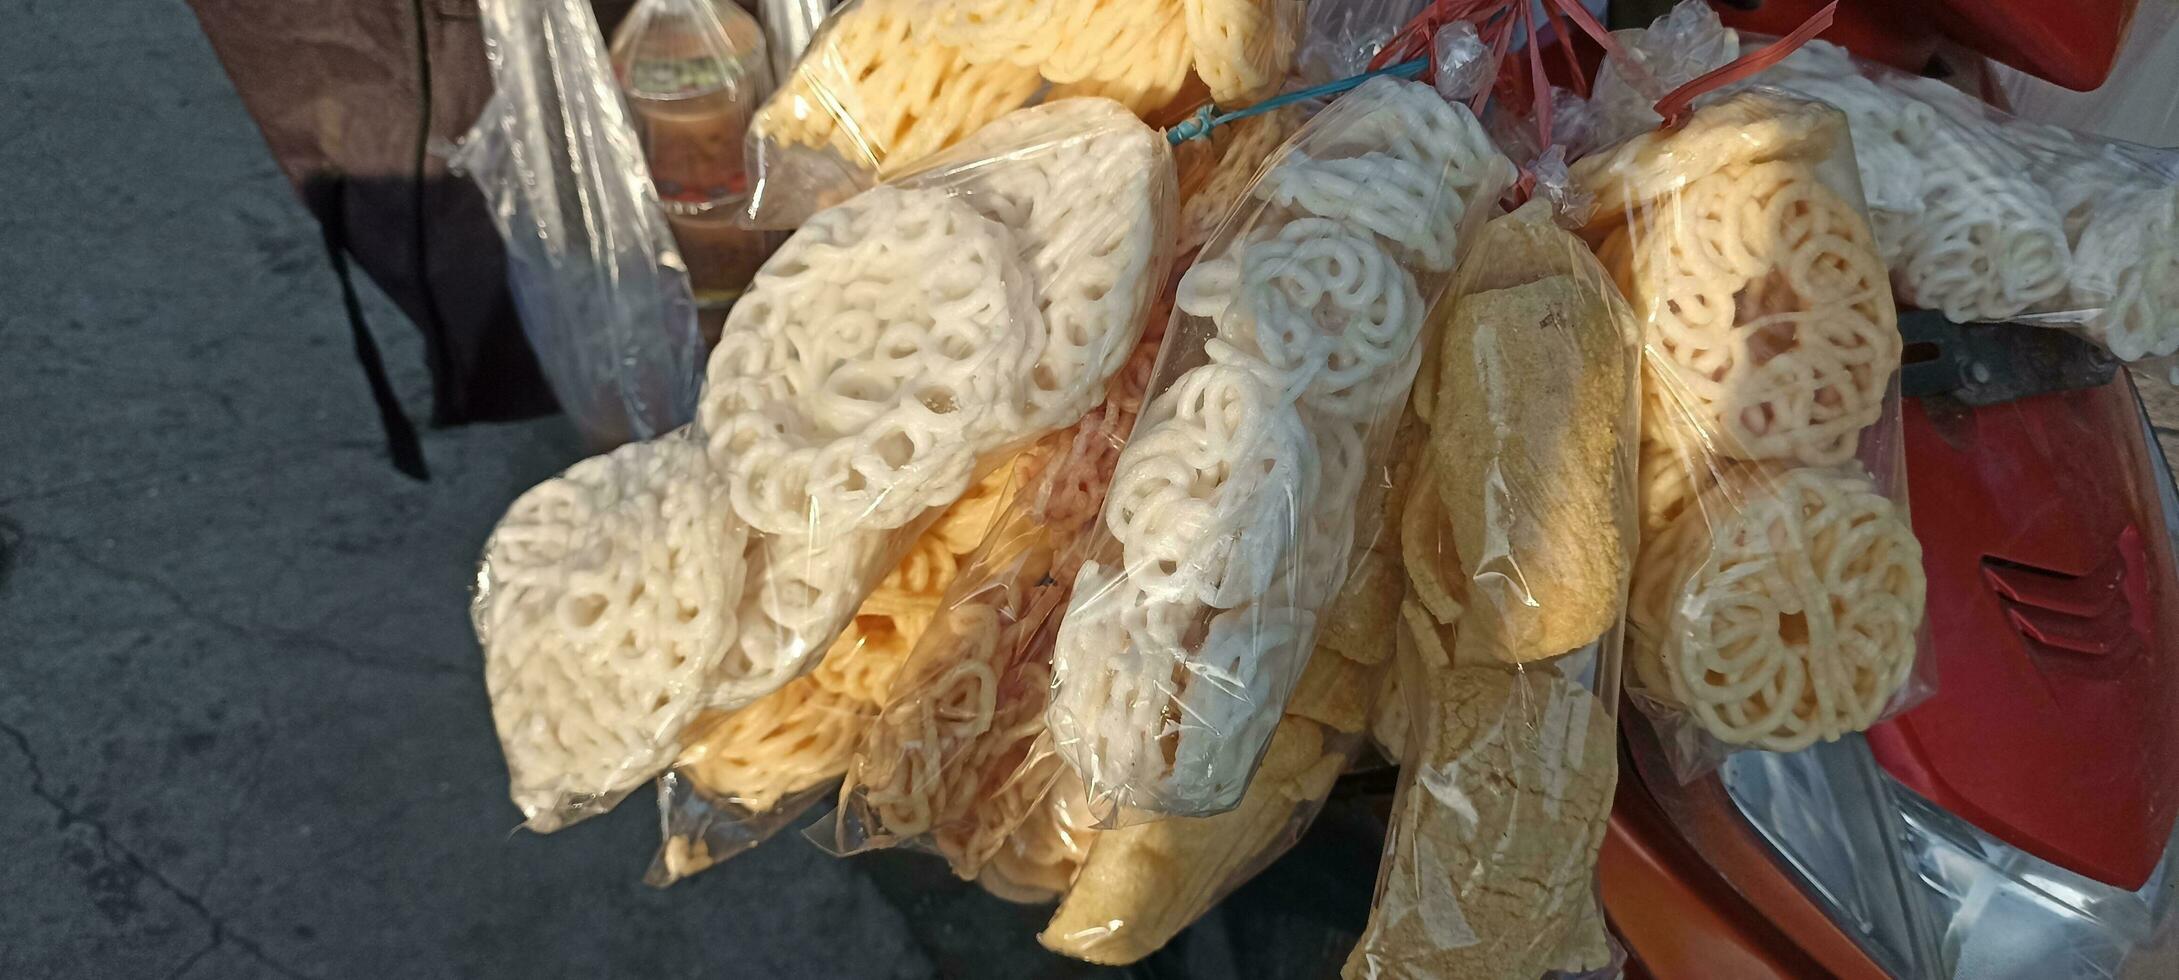 various crackers in Indonesia photo